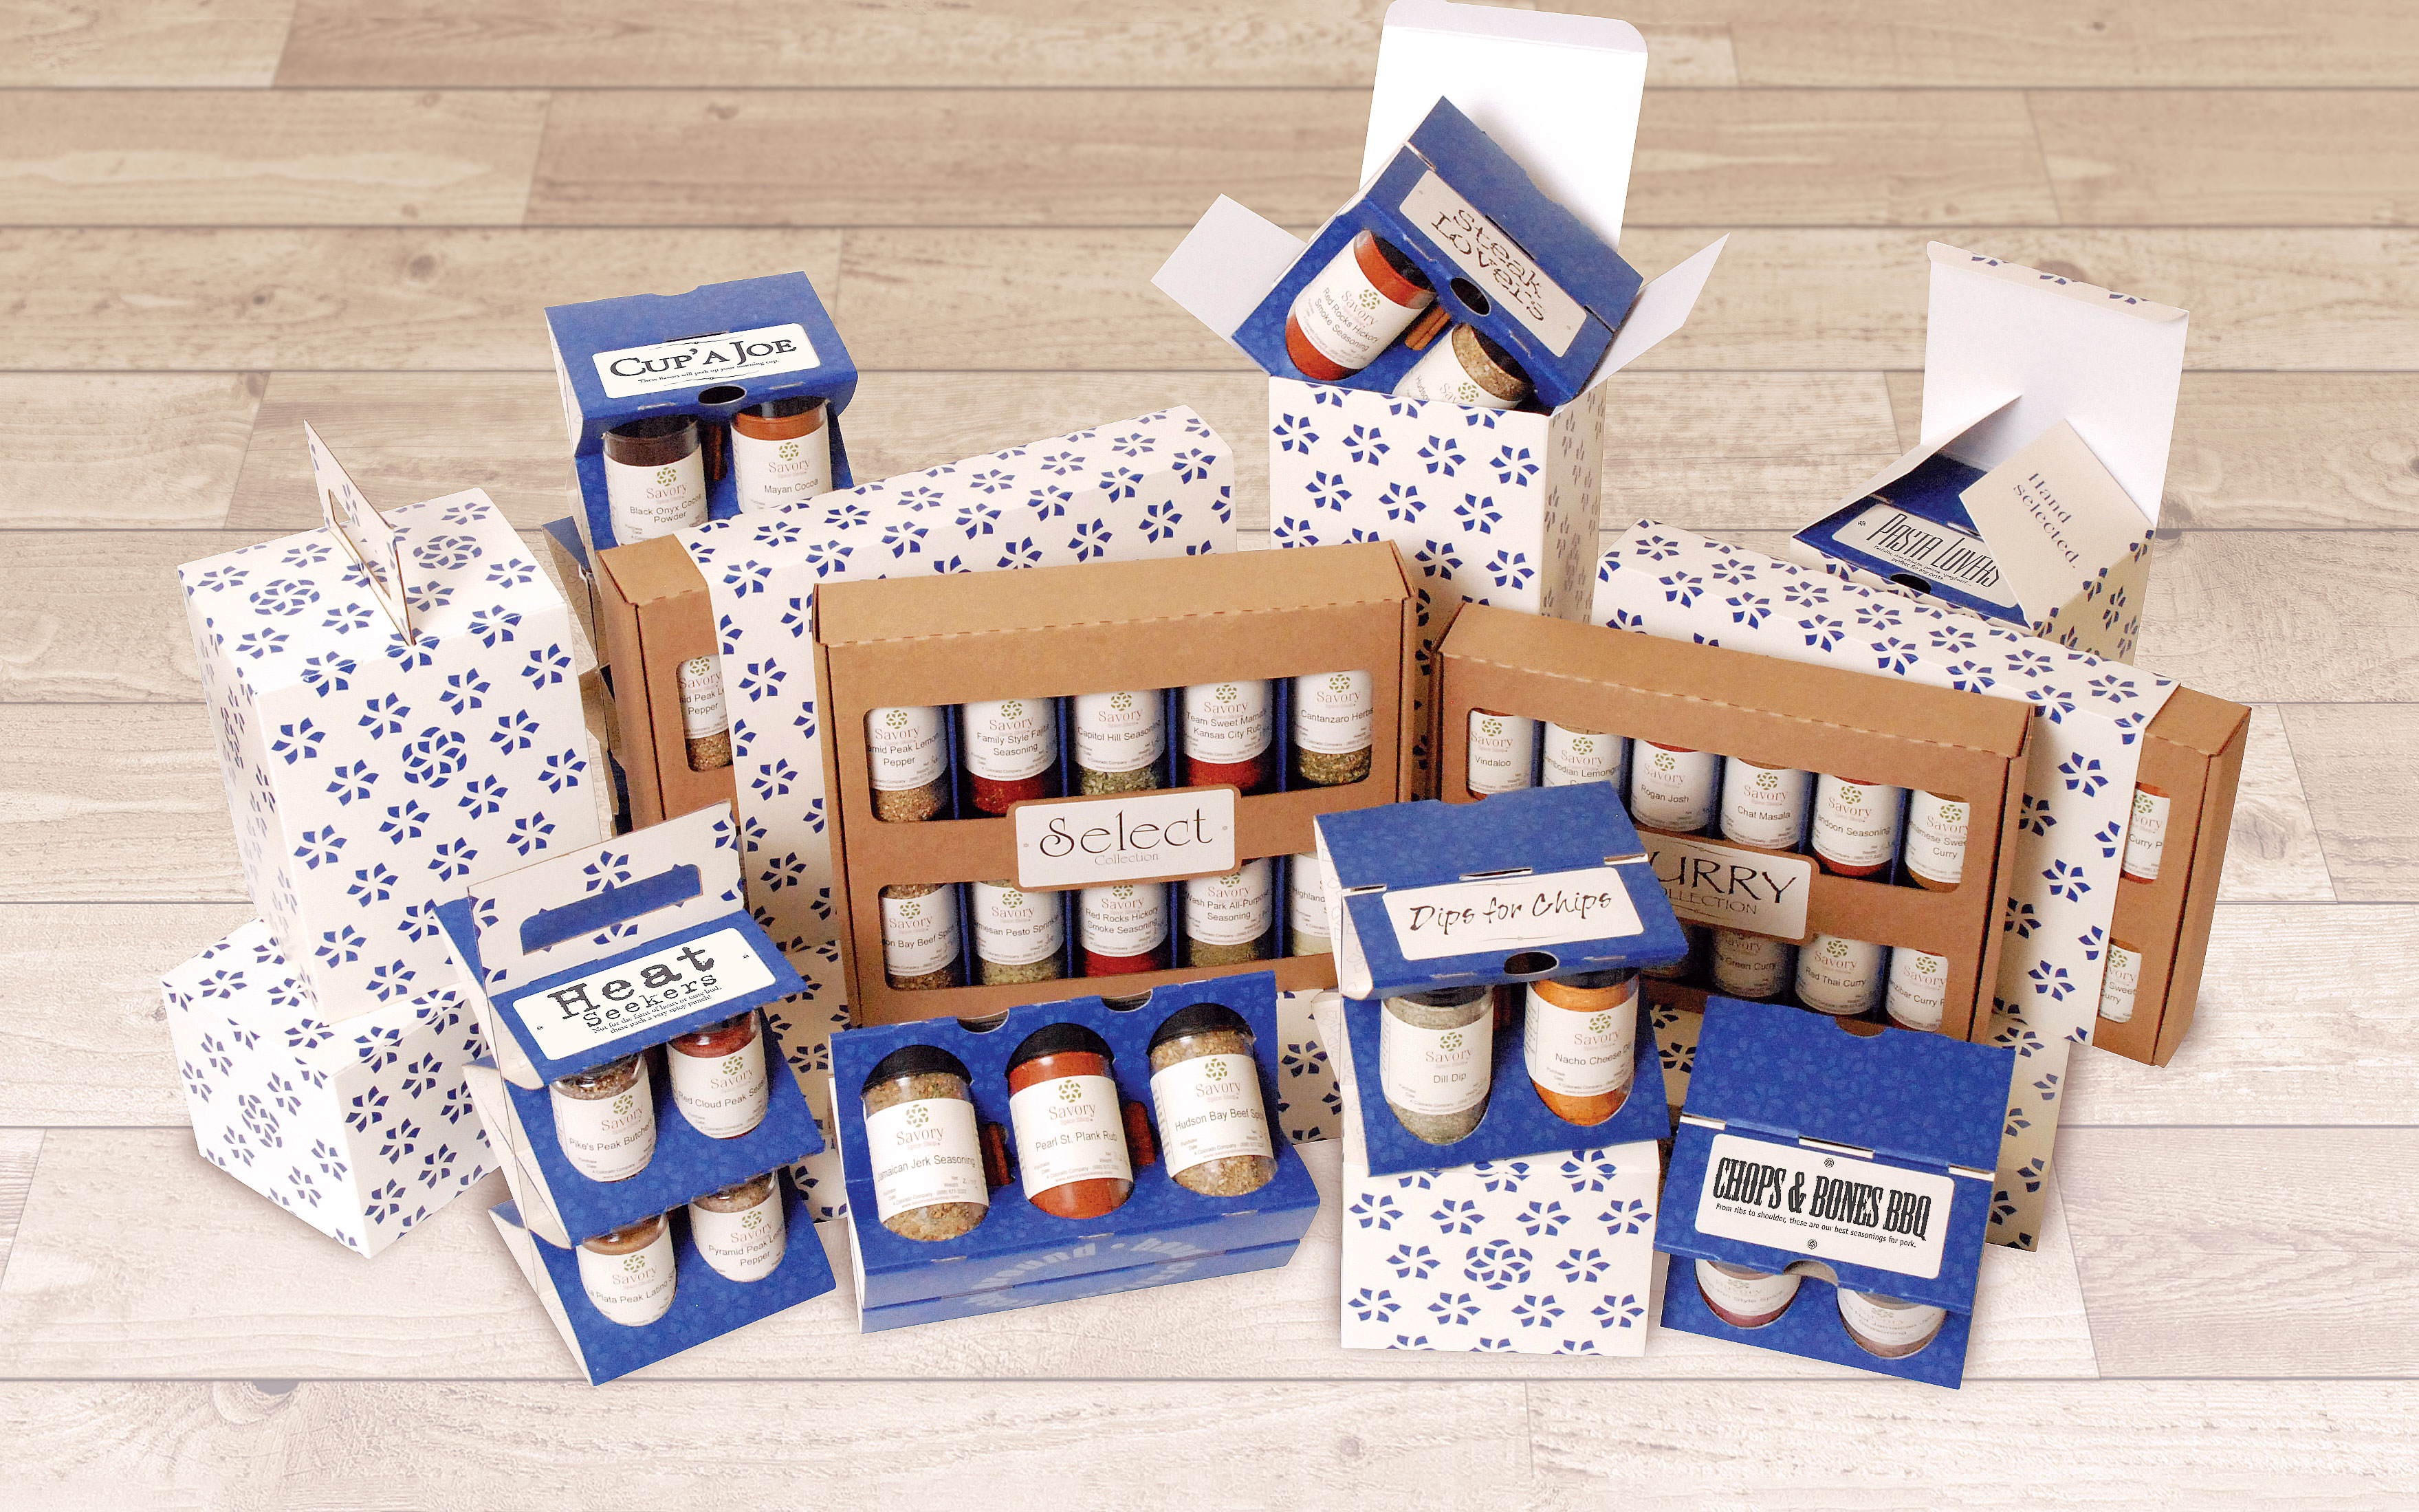 Savory Spice offers dozens of gift box sets, starting at $10, designed around specific themes and uses.